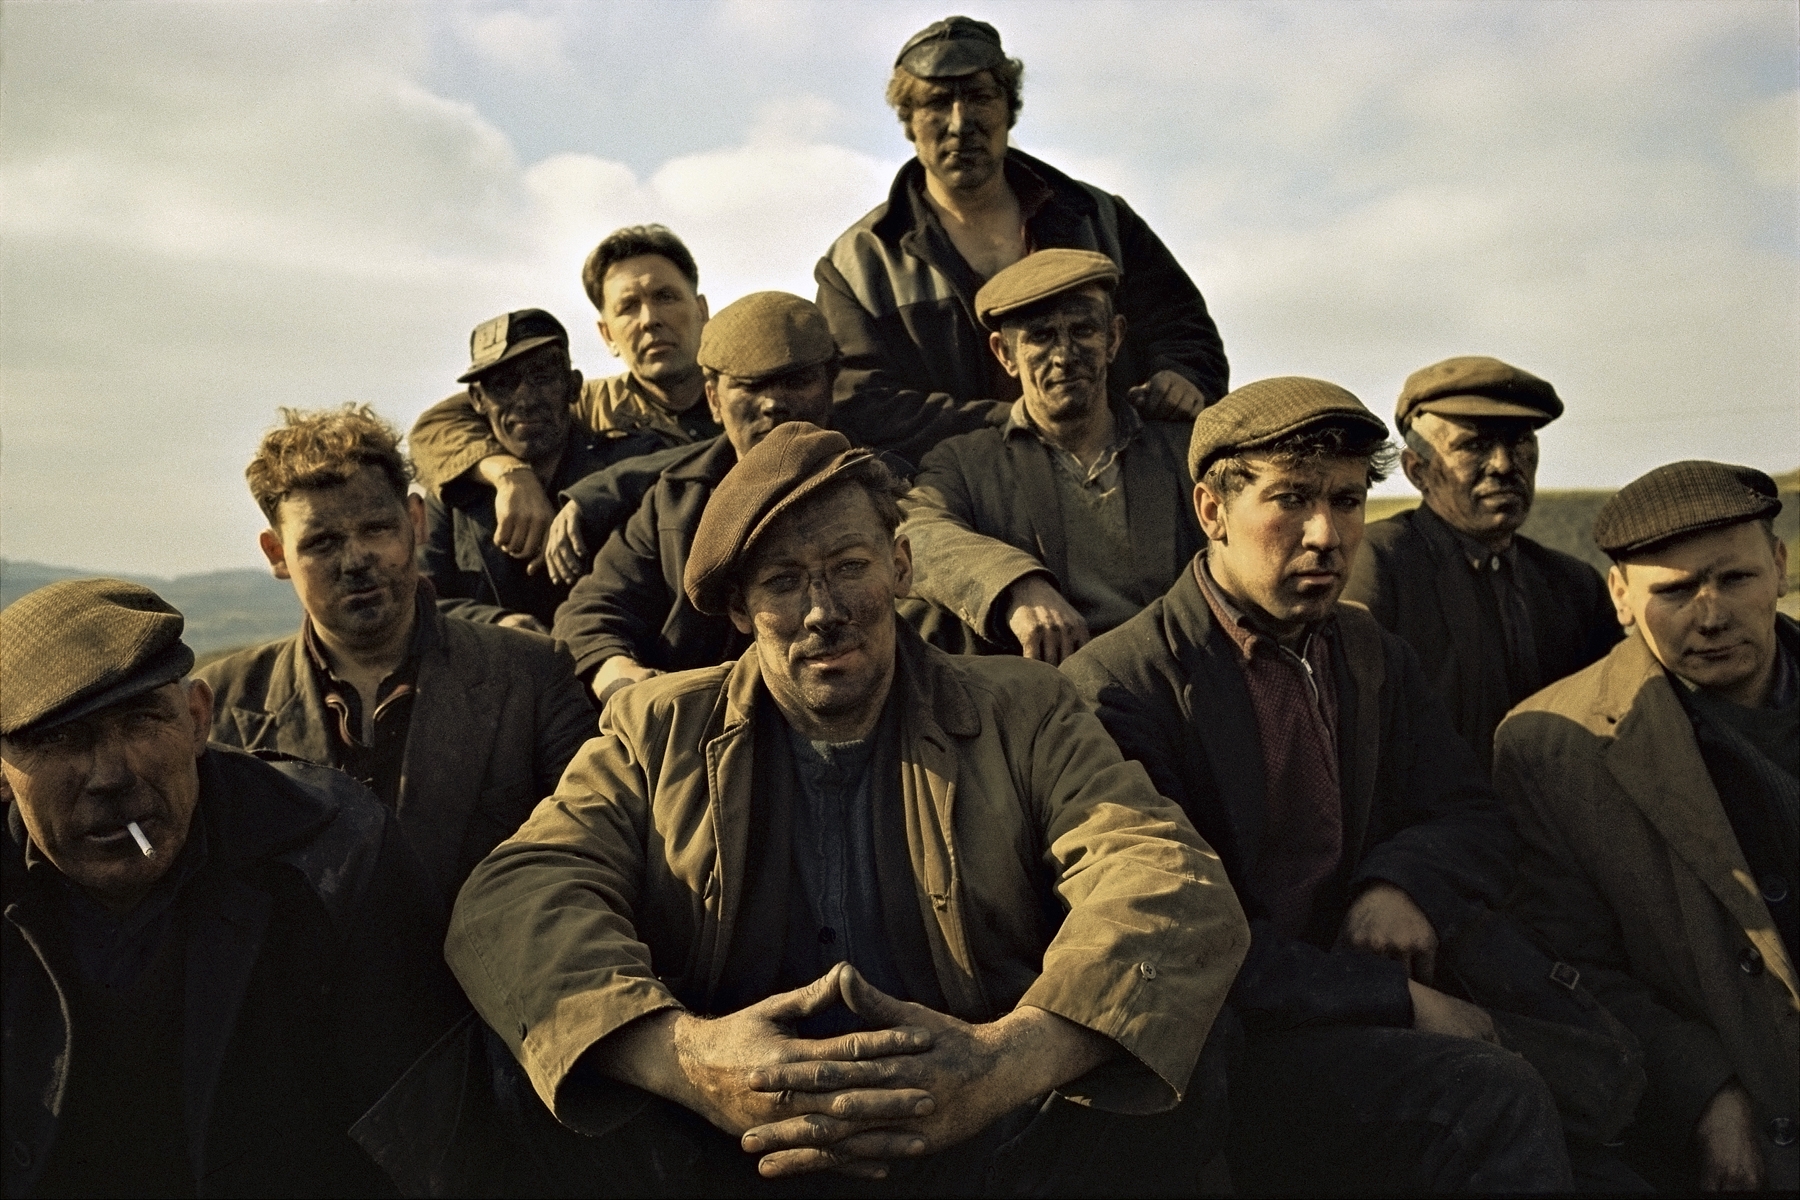 Miners, Transition Gallery